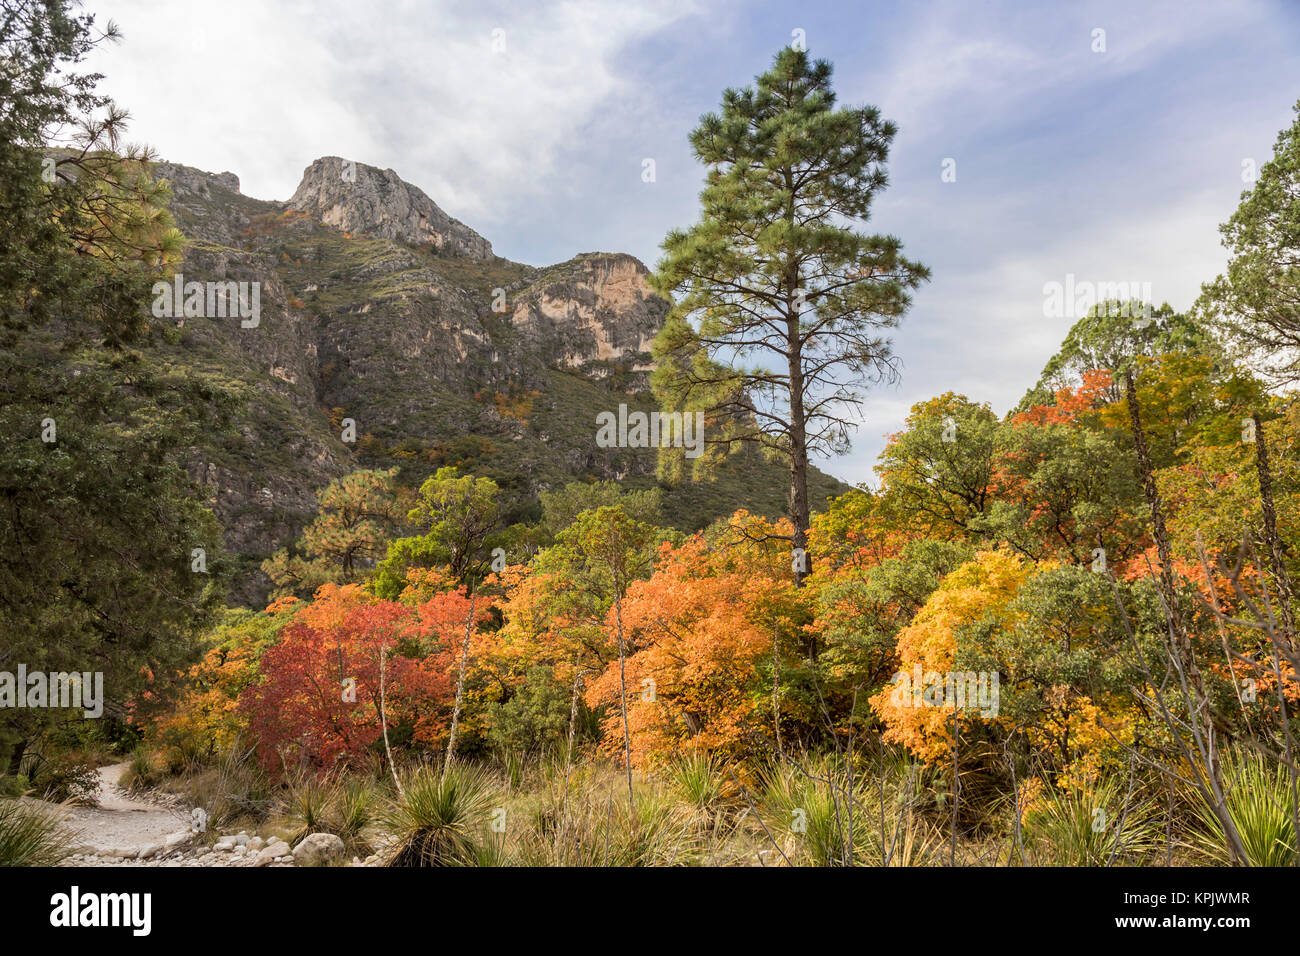 Guadalupe Mountains National Park, Texas - Fall colors in McKittrick Canyon.a Stock Photo